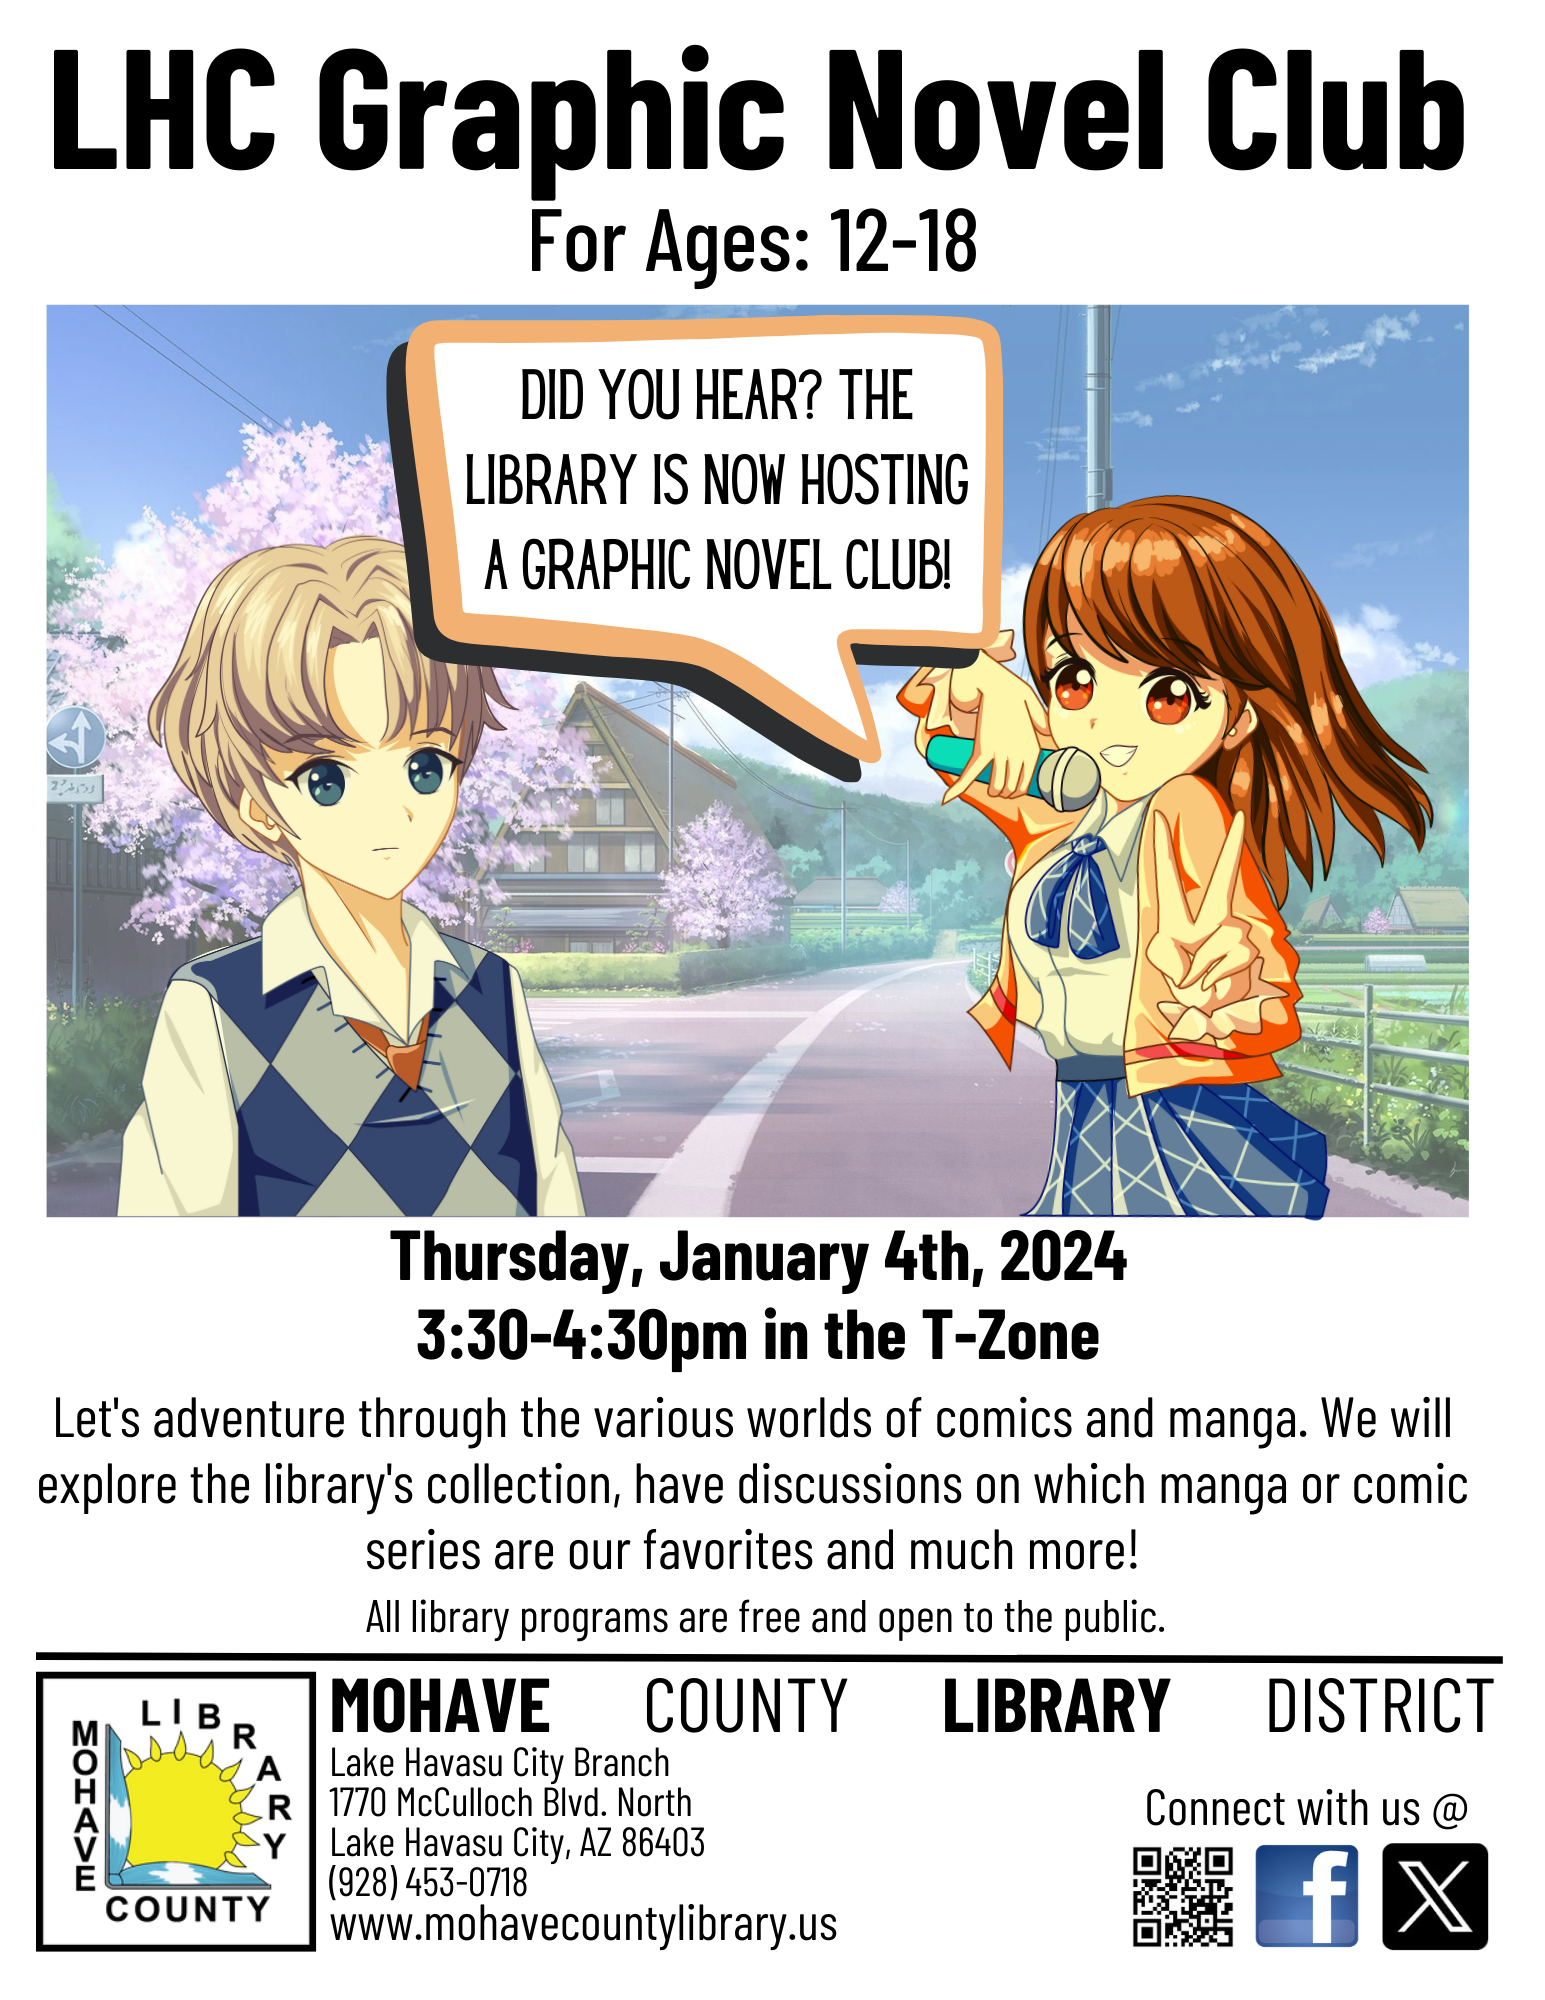 Teen Graphic Novel Club @ the Library